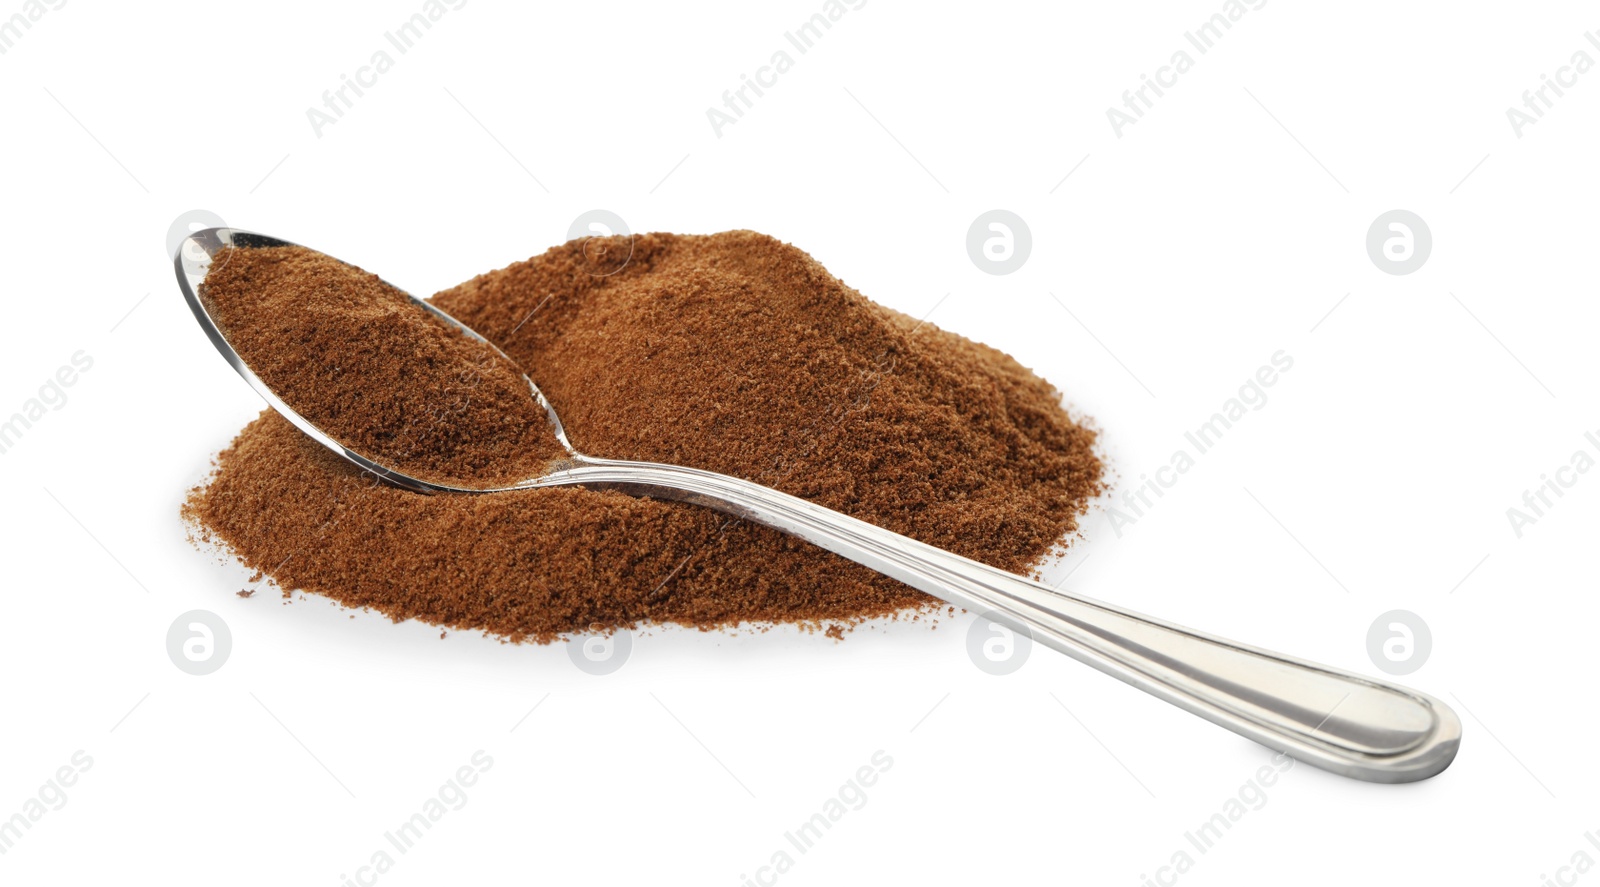 Photo of Spoon and chicory powder on white background